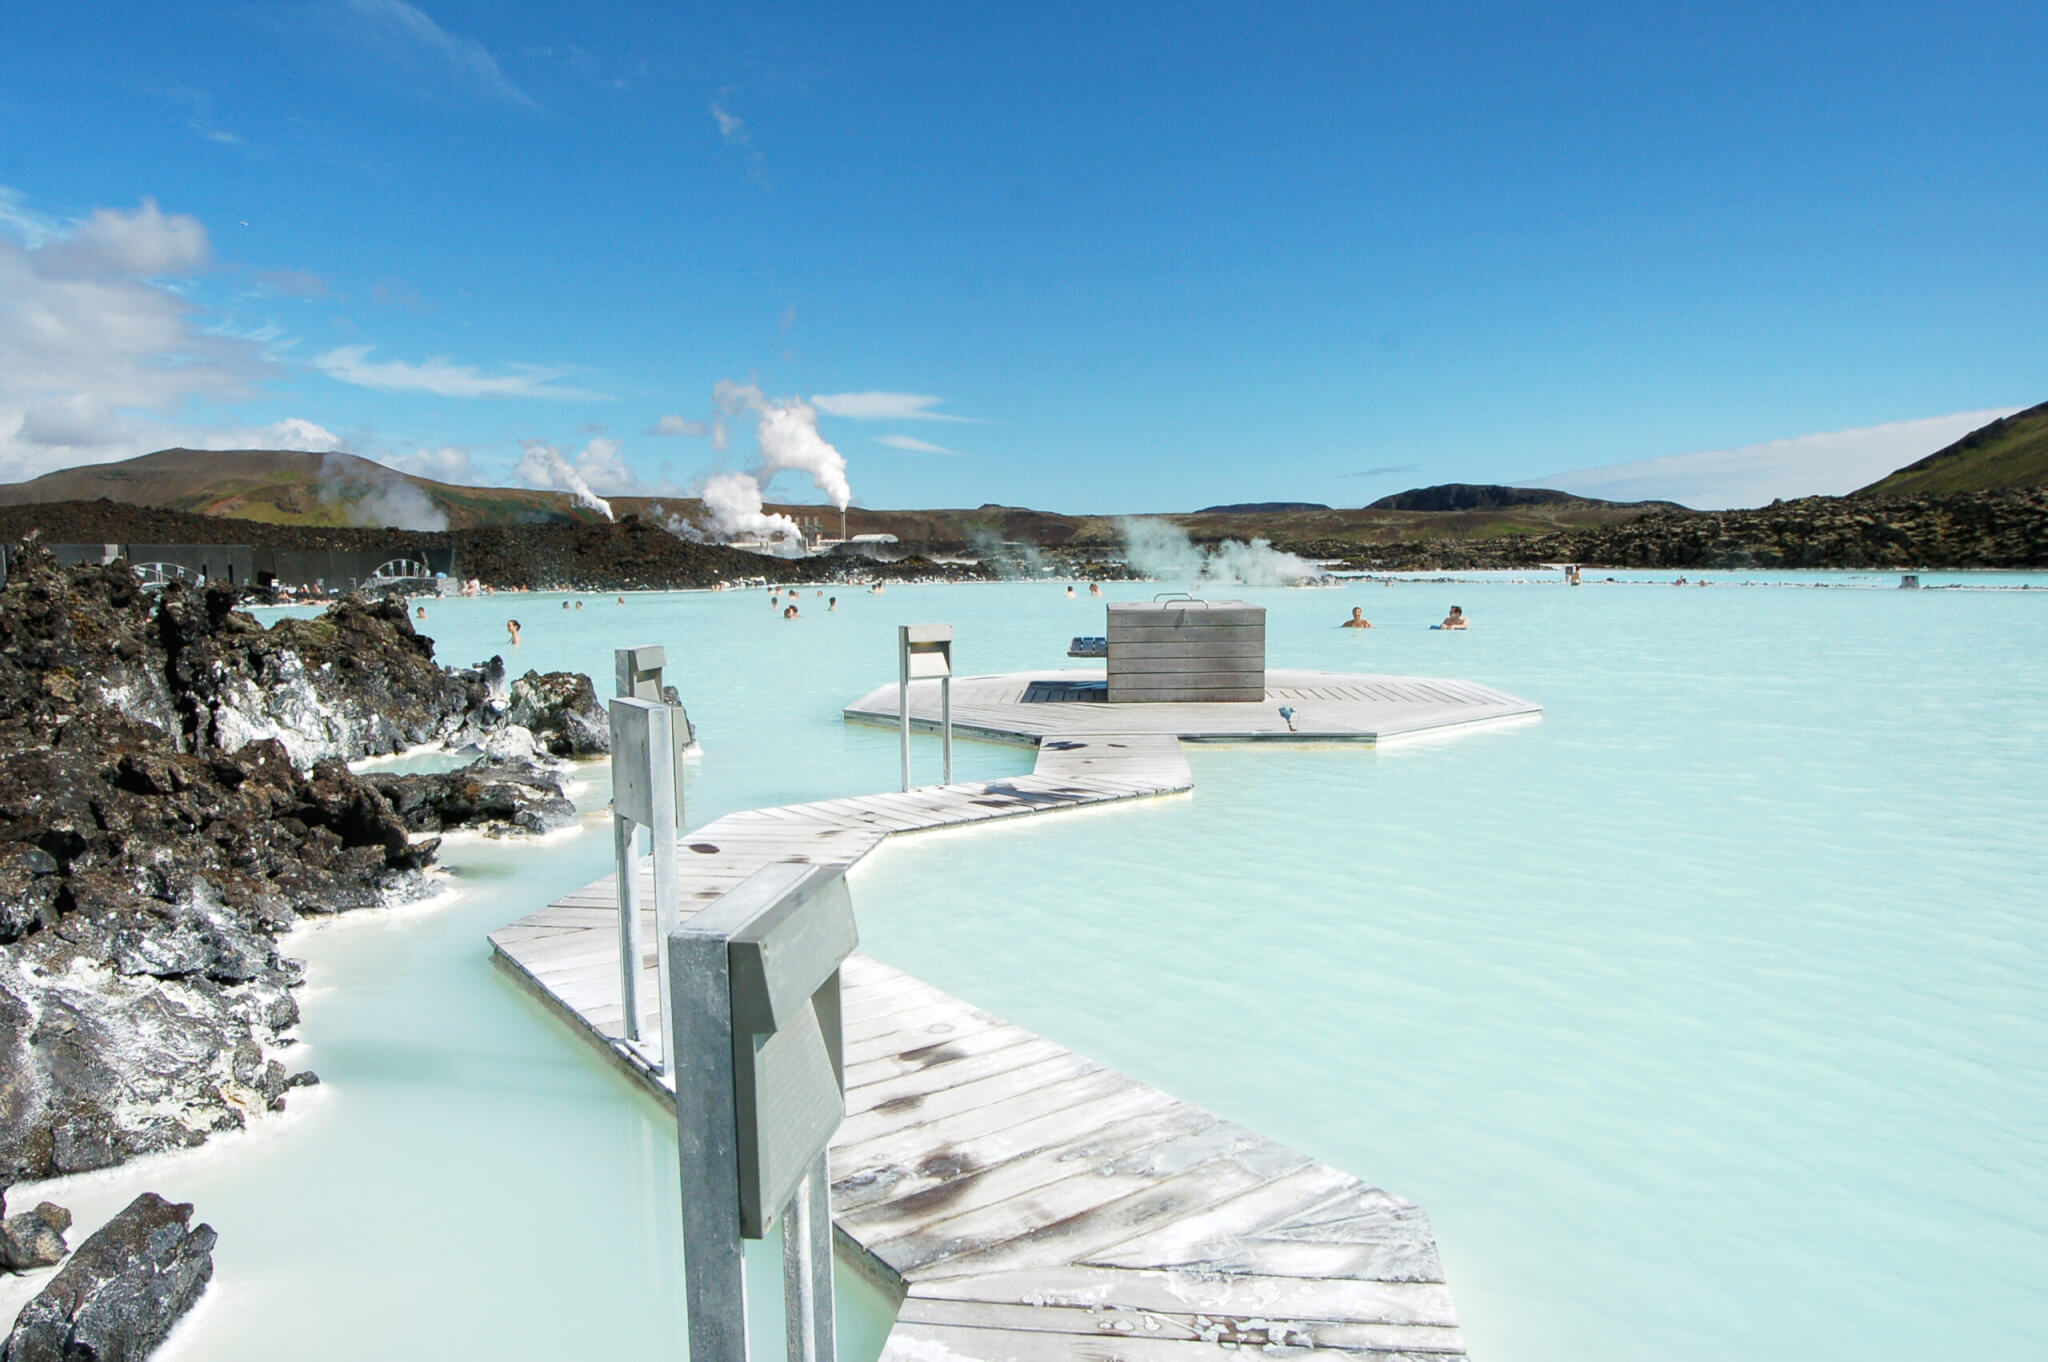 The Blue Lagoon geothermal bath resort in Iceland.